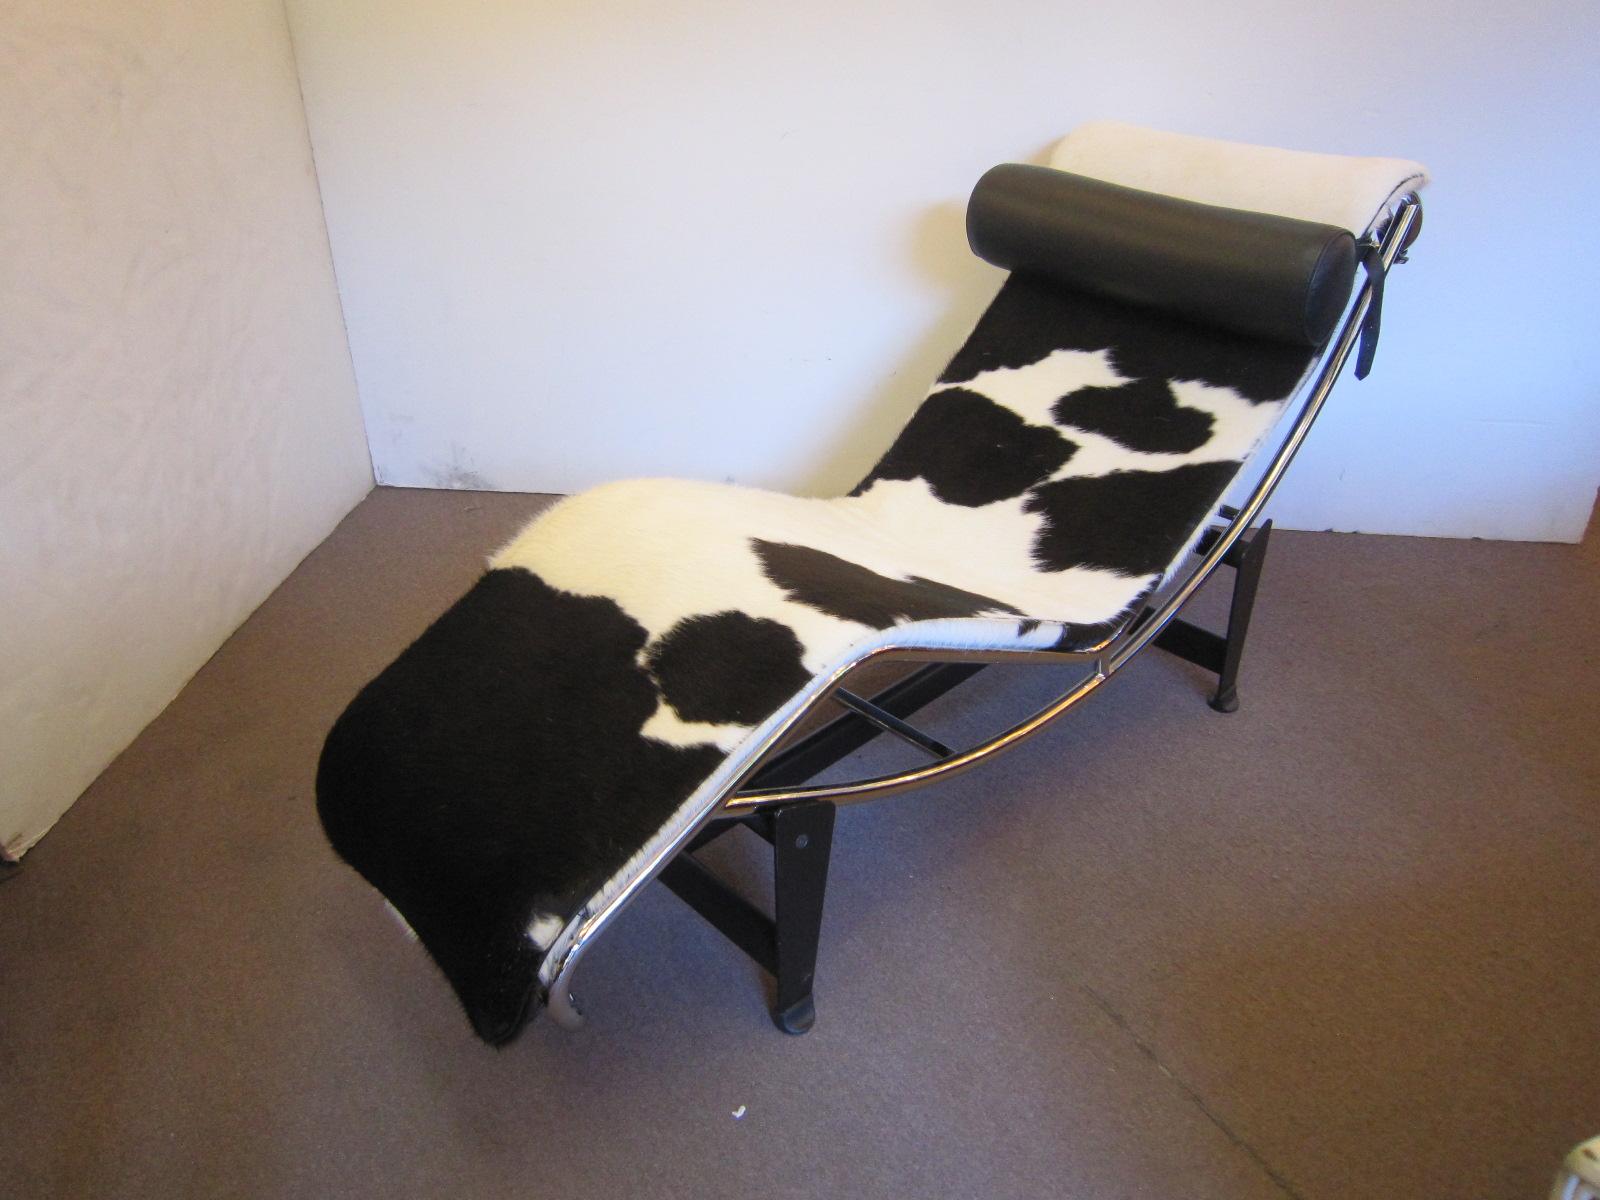 Chromed tubular steel with blackened steel base, full grain natural black and white cowhide in the style of Le Corbusier. The LC4 model is a chaise longue originally designed in 1928 by the Swiss architect Le Corbusier and French architect Charlotte